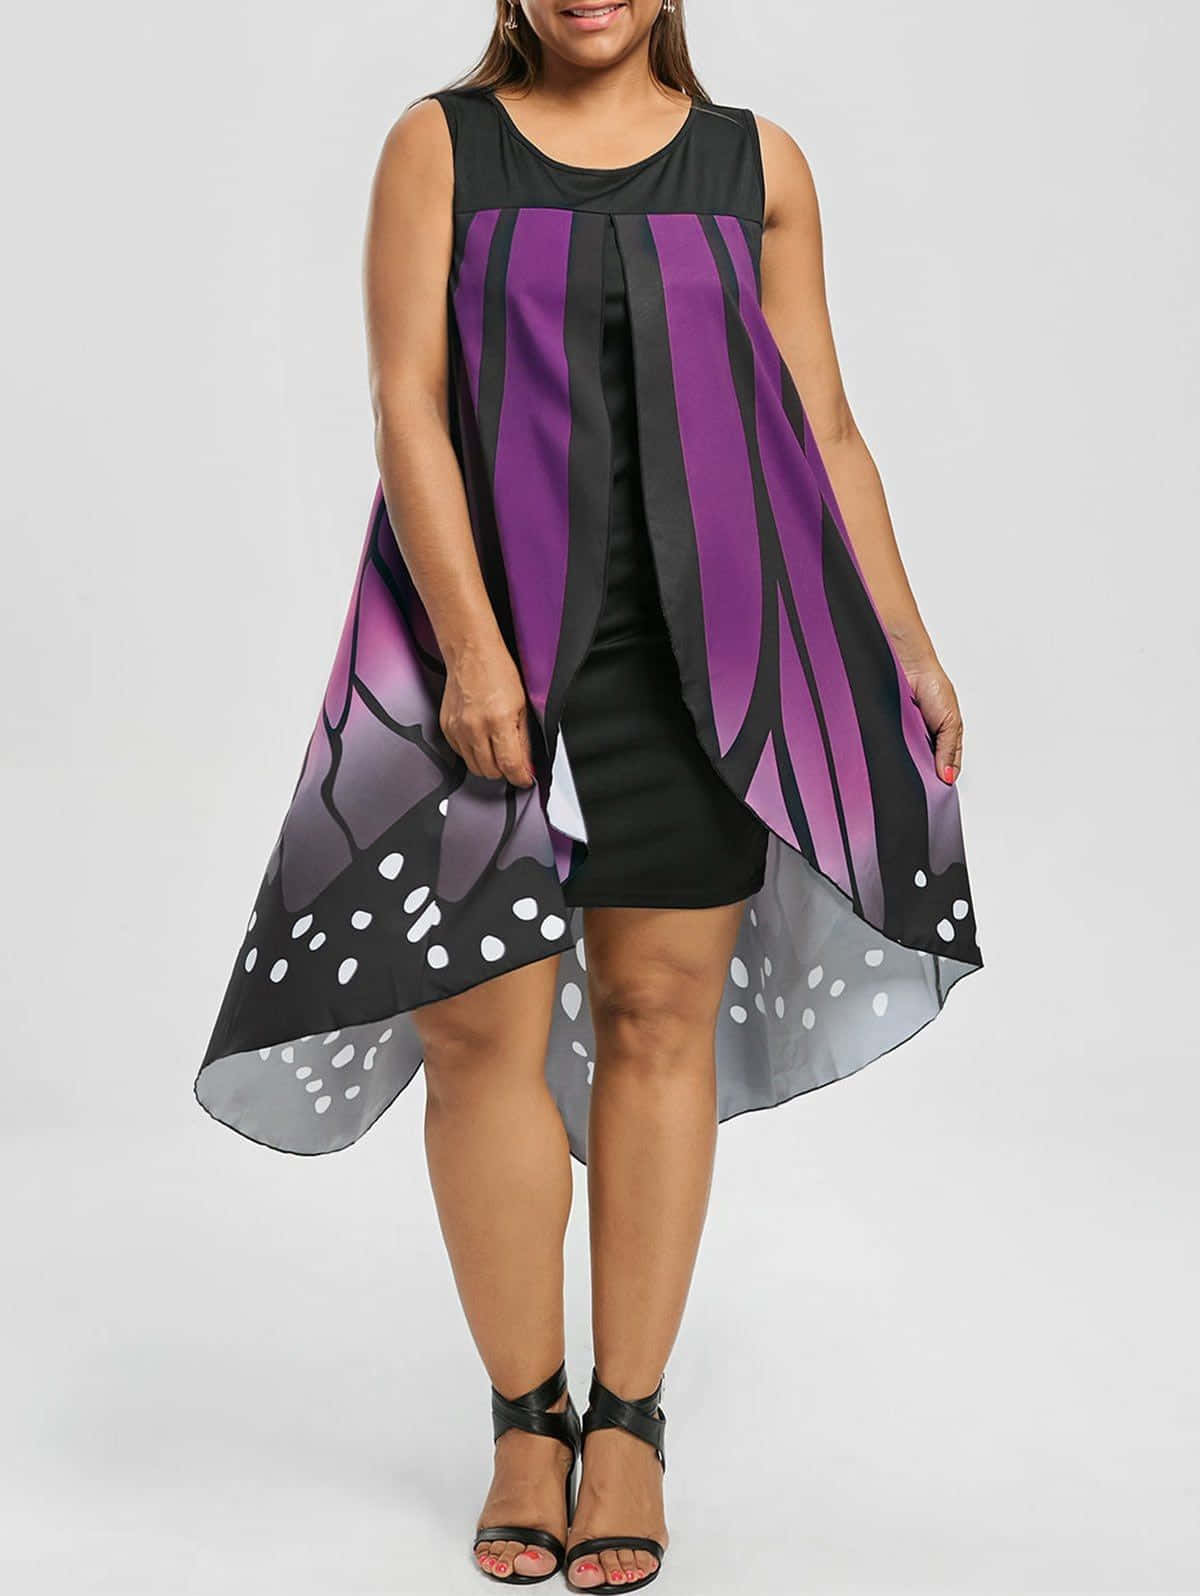 Make a Bold fashion statement with a Butterfly Wing Dress Wallpaper